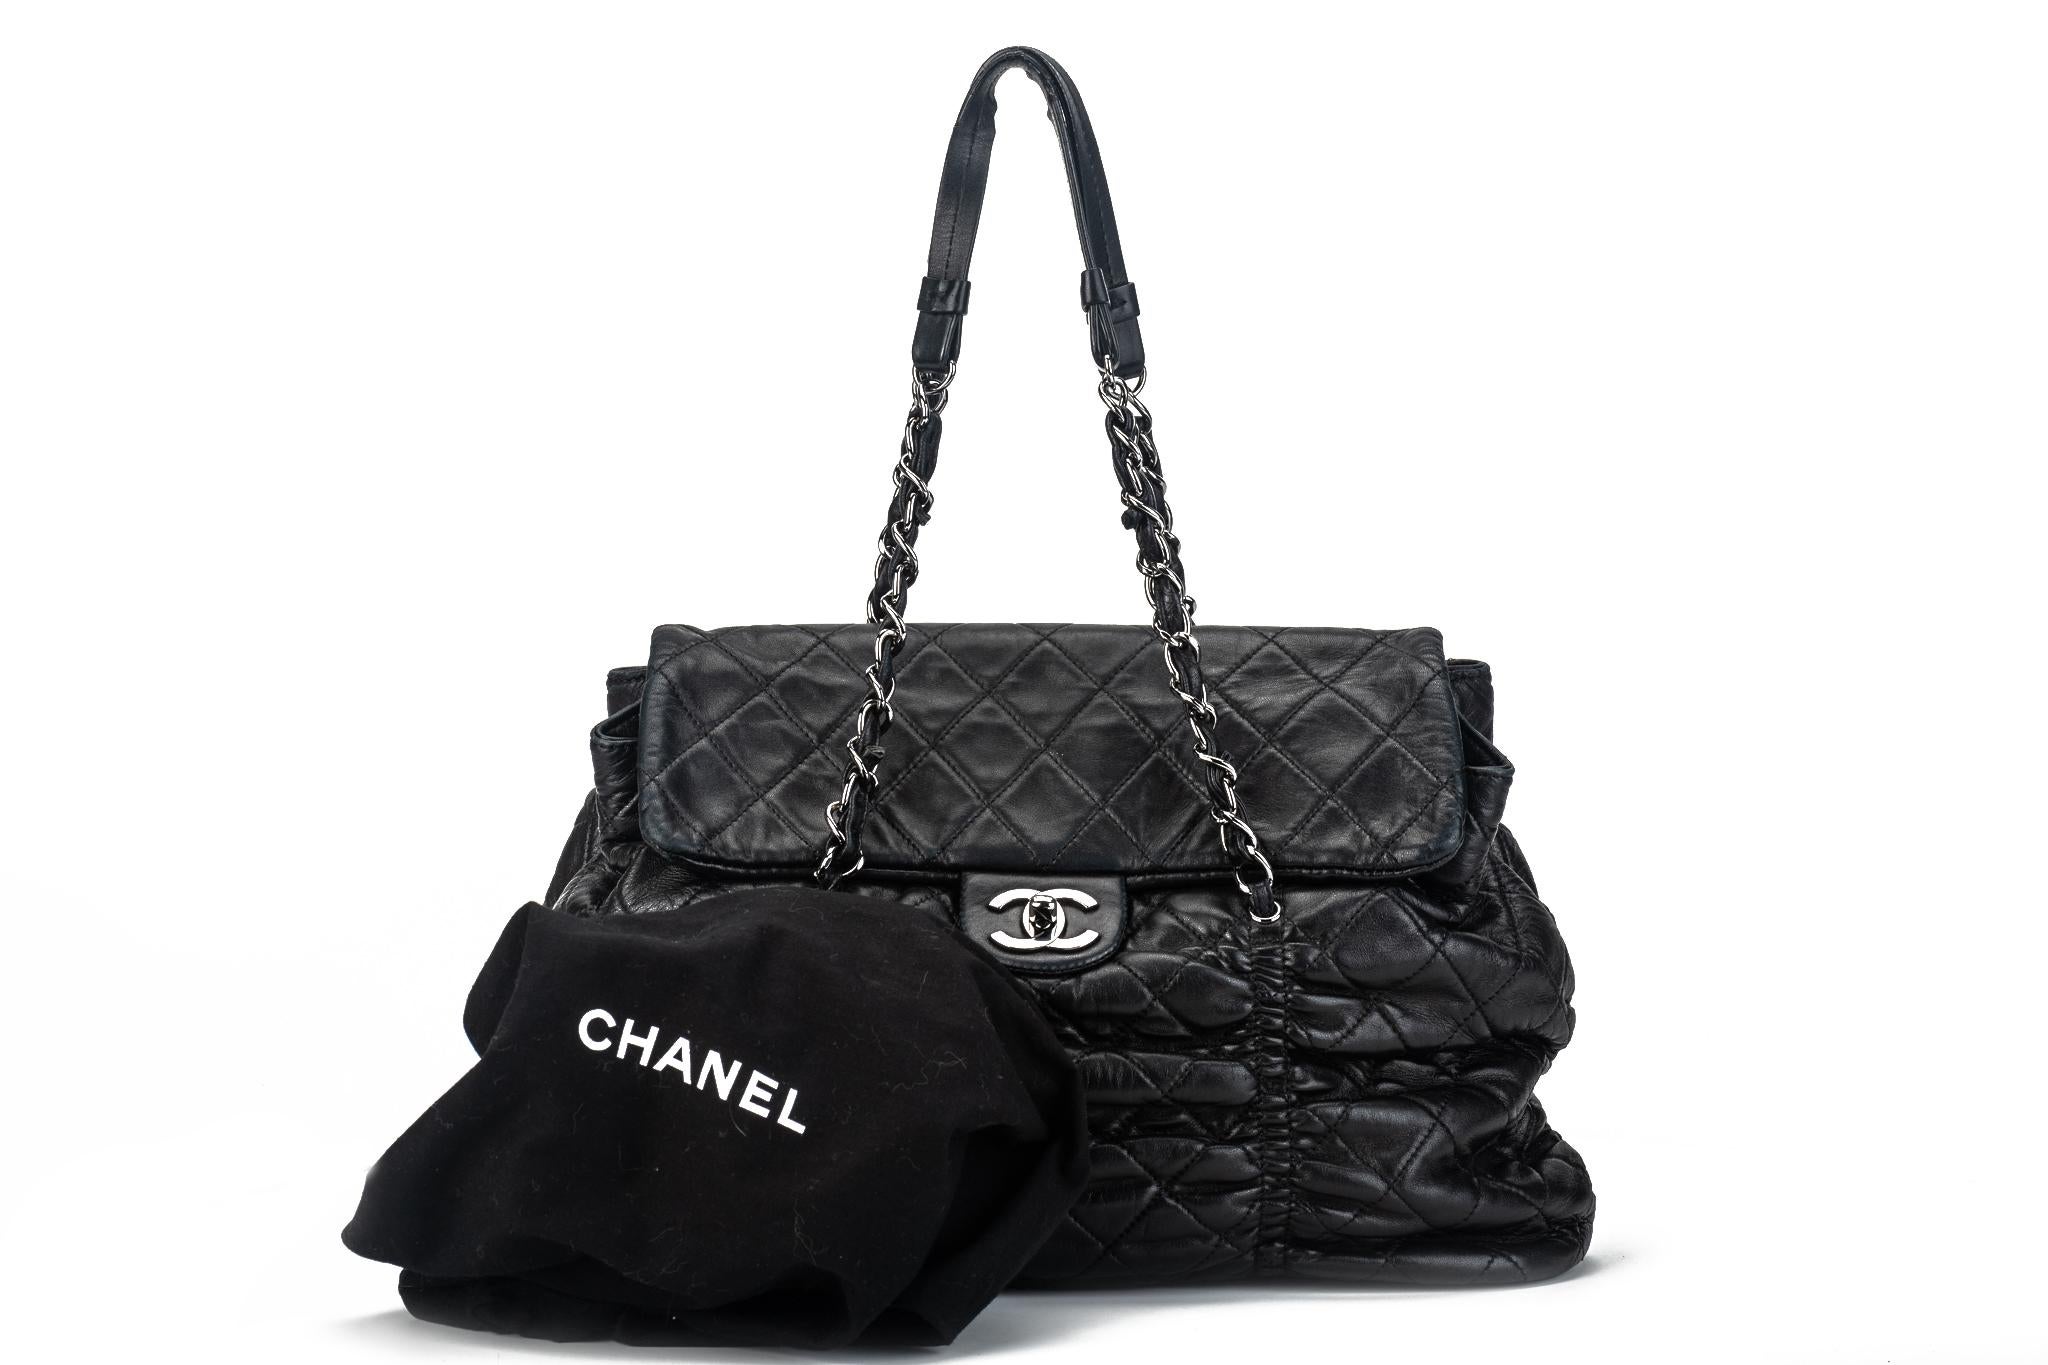 Chanel black rouched soft lambskin leather shoulder bag with silver tone hardware. Very good condition on leather , minor frying on leather strap edges. Shoulder drop 7